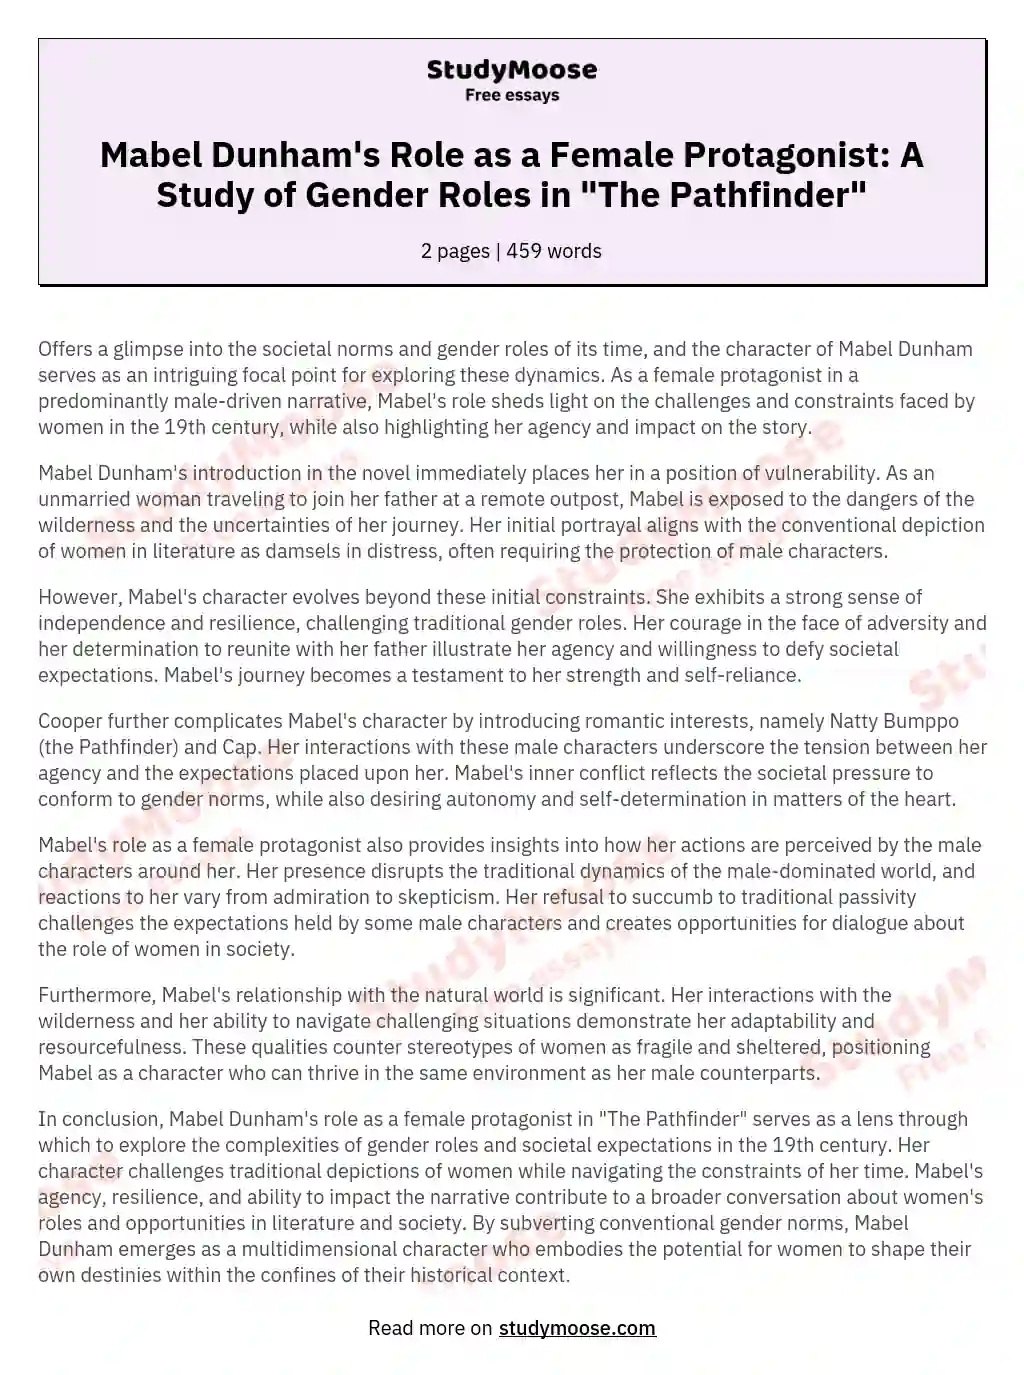 Mabel Dunham's Role as a Female Protagonist: A Study of Gender Roles in "The Pathfinder" essay